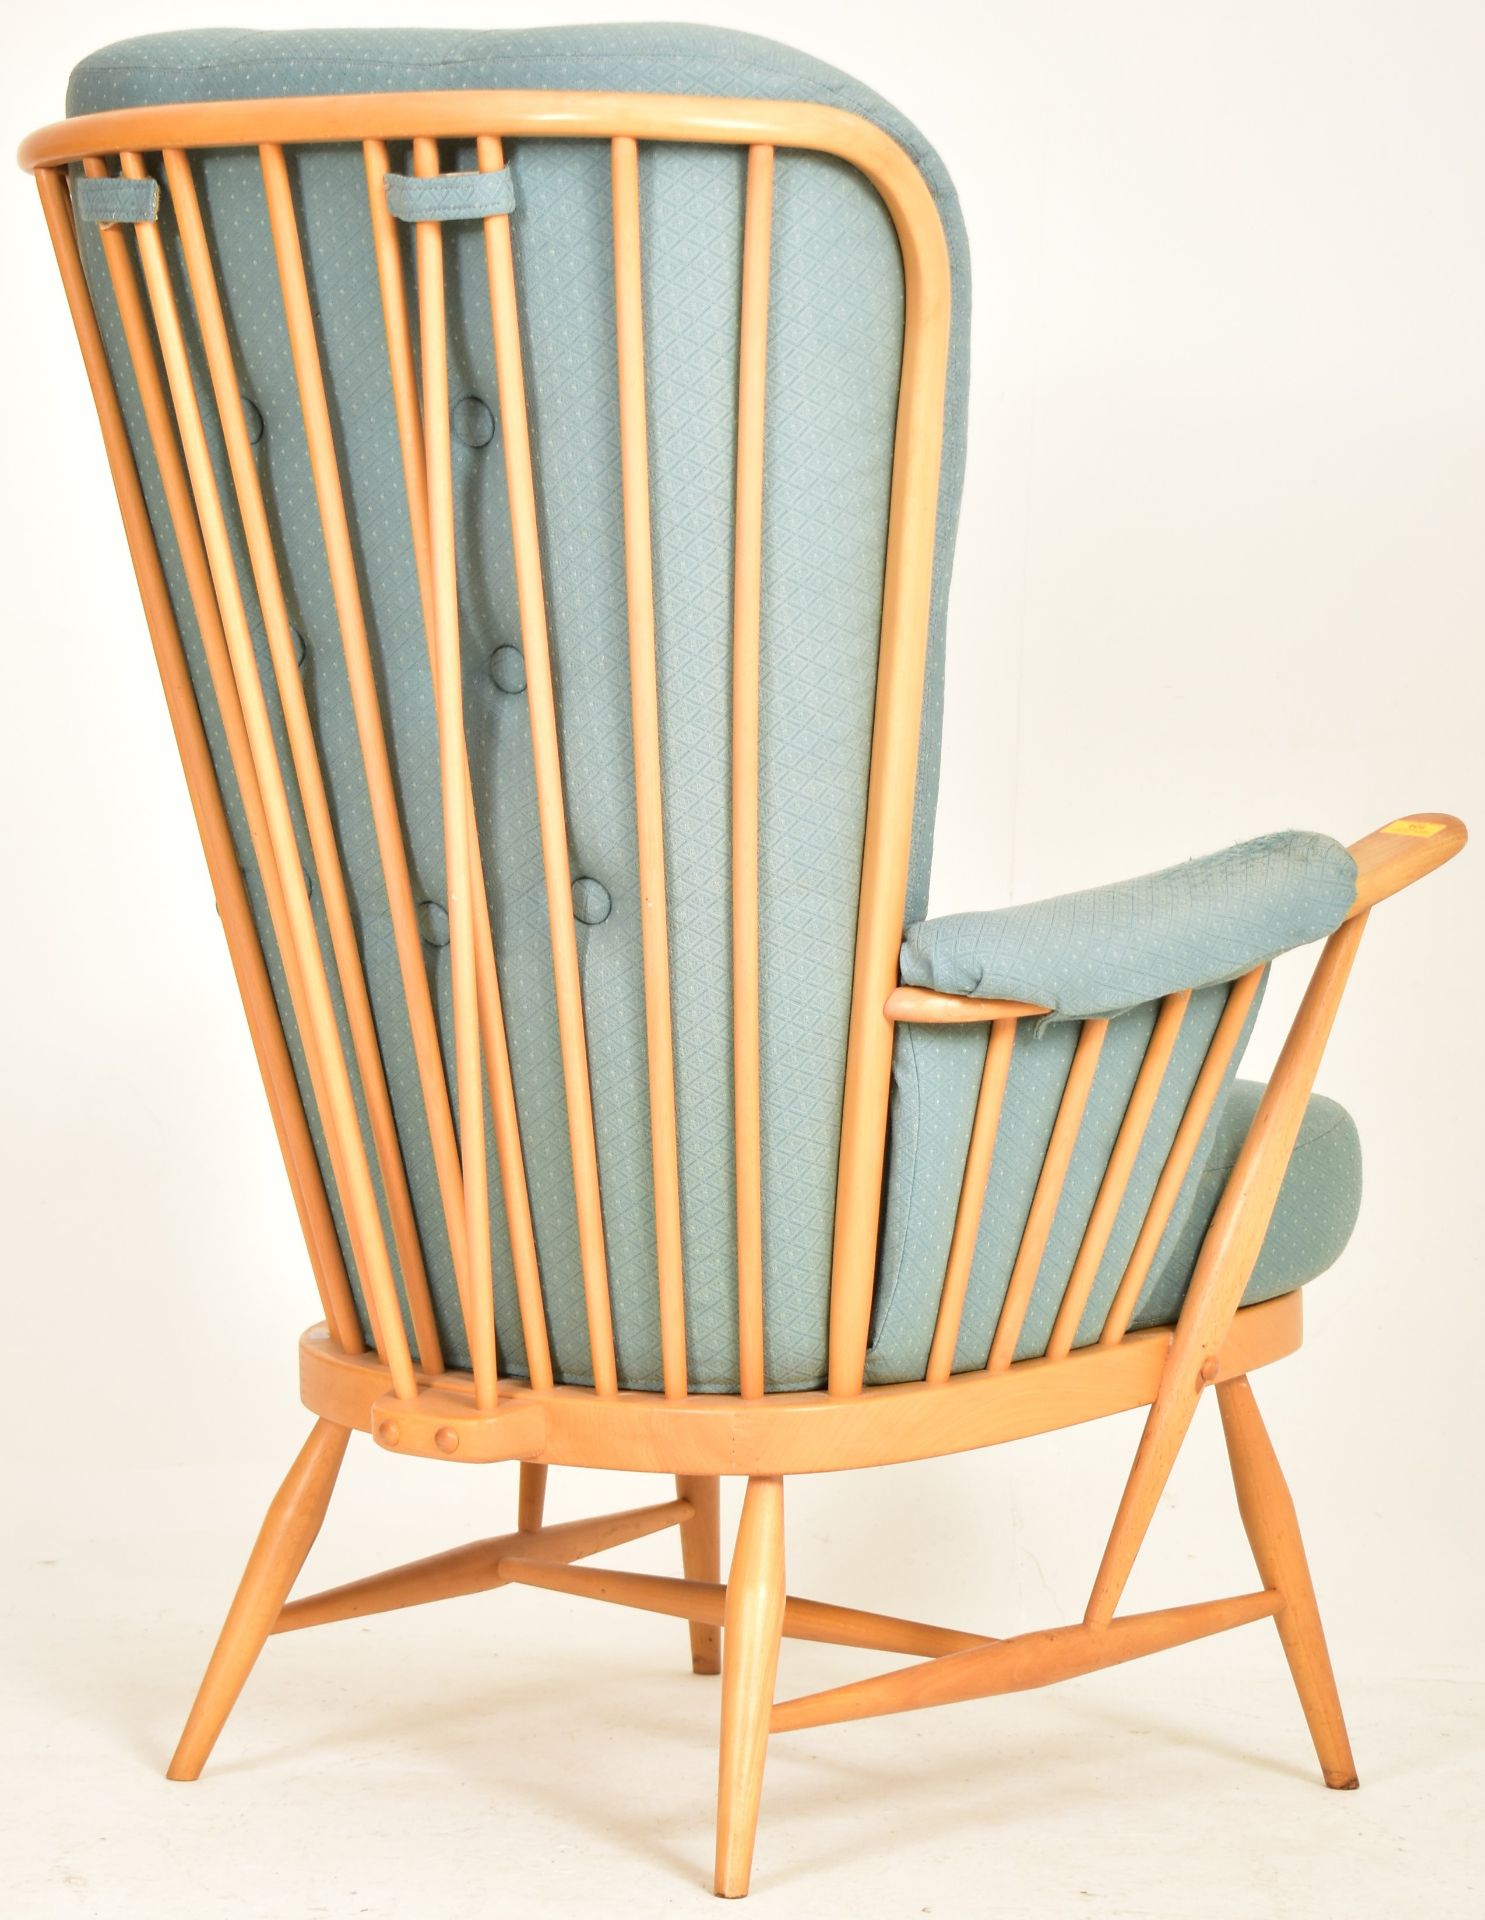 ERCOL - WINDSOR MODEL - MID CENTURY HIGH BACK ARMCHAIR - Image 5 of 5